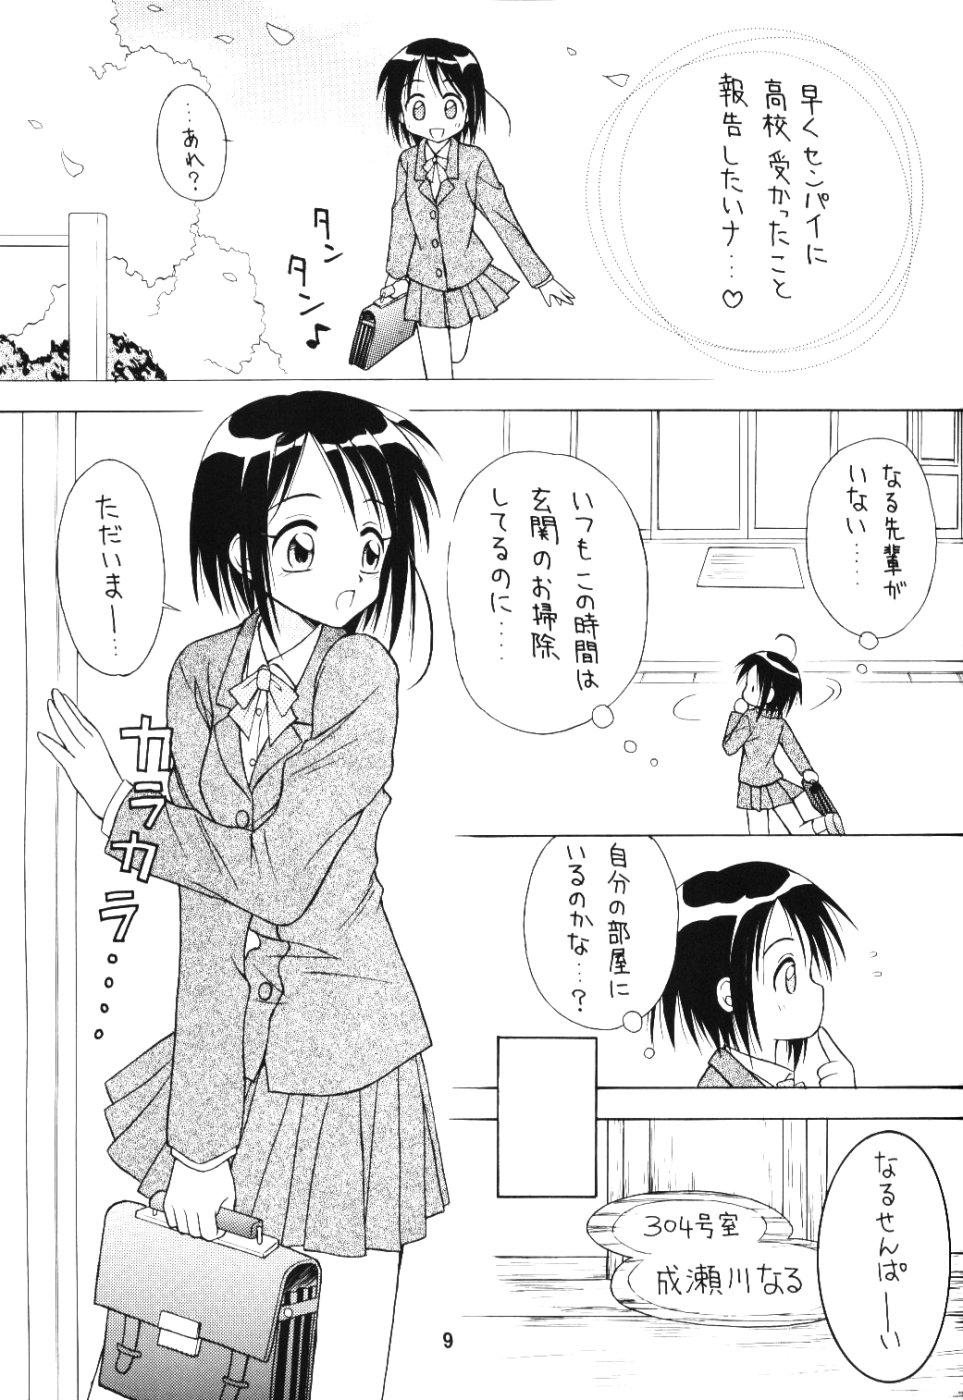 Piroca Lovely 4 - Love hina Gay Amateur - Page 8